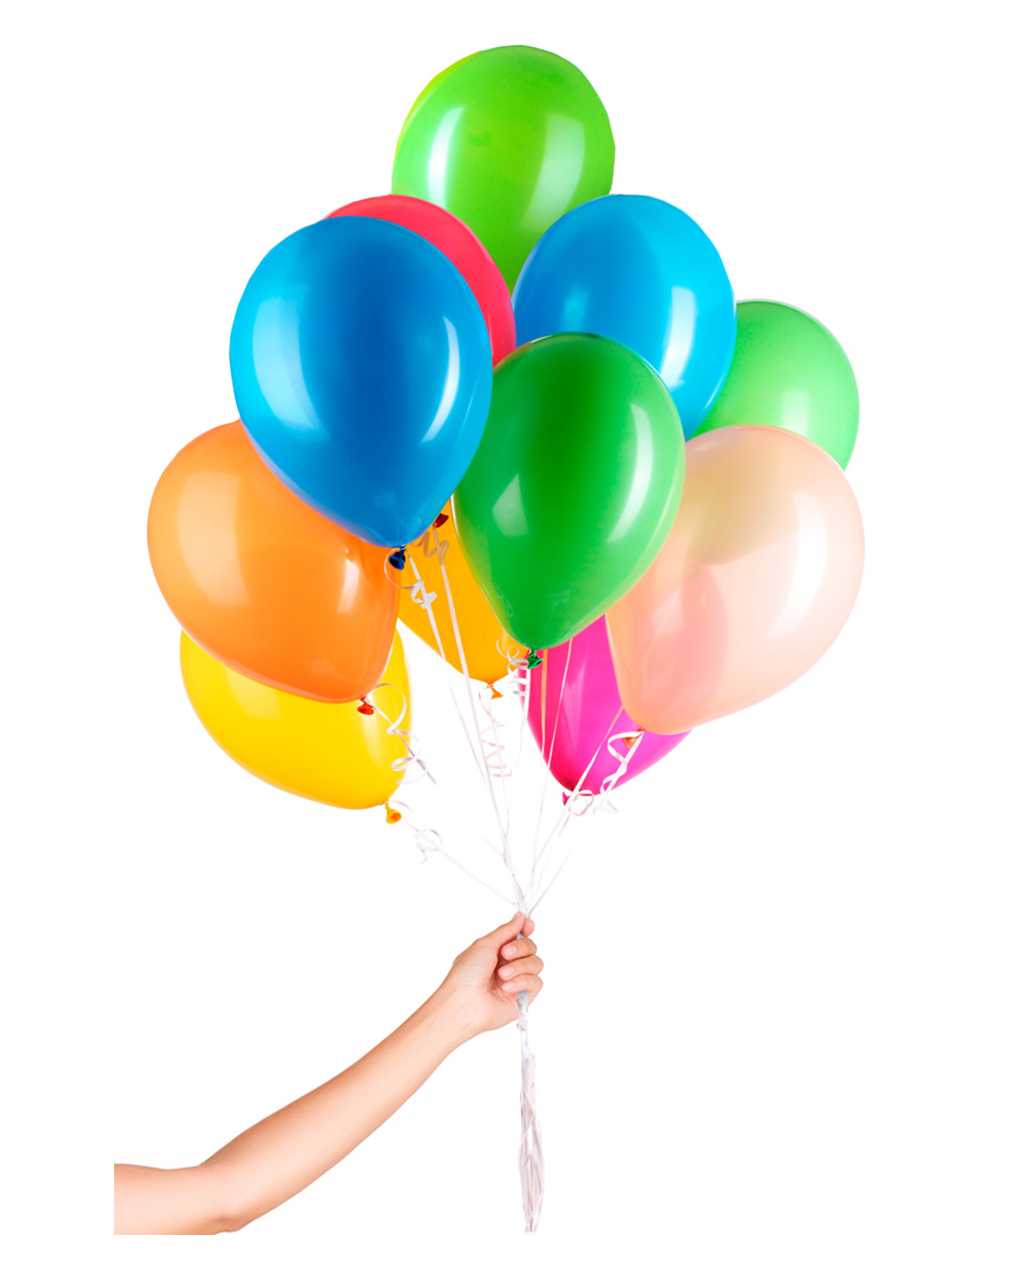 https://inst-1.cdn.shockers.de/hs_cdn/out/pictures/master/product/1/30-latex-ballons-fuer-helium-mit-schnur--heliumballons-bunt-geburtstag--helium-balloons-with-ribbon--29936.jpg